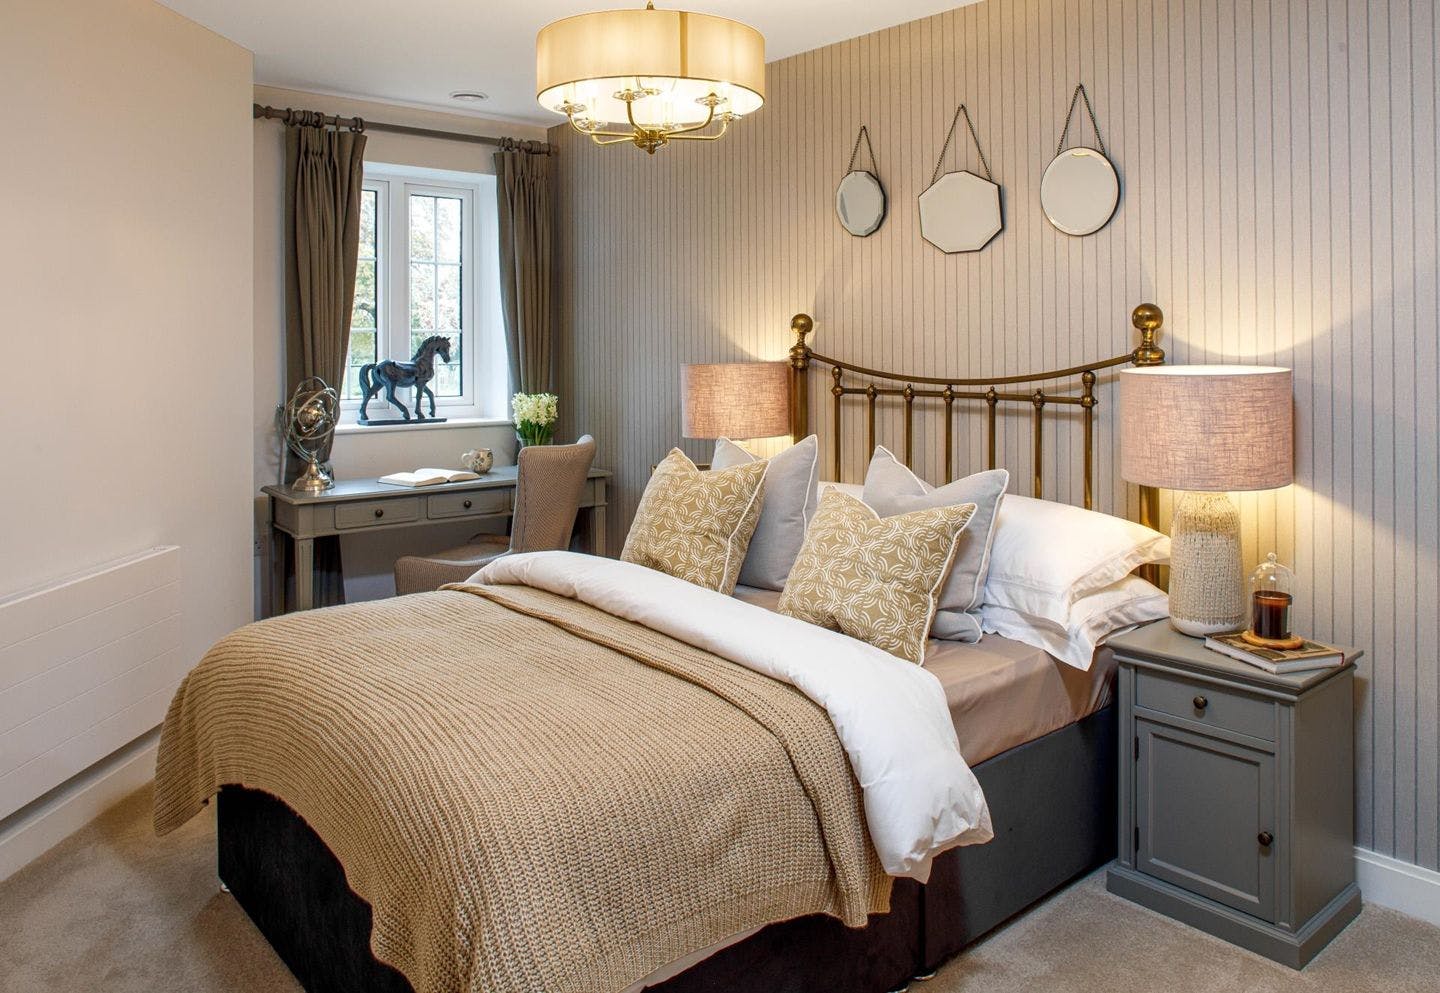 Bedroom at The Apartments at Royal Gardens Retirement Development in Buntingford, Hertfordshire